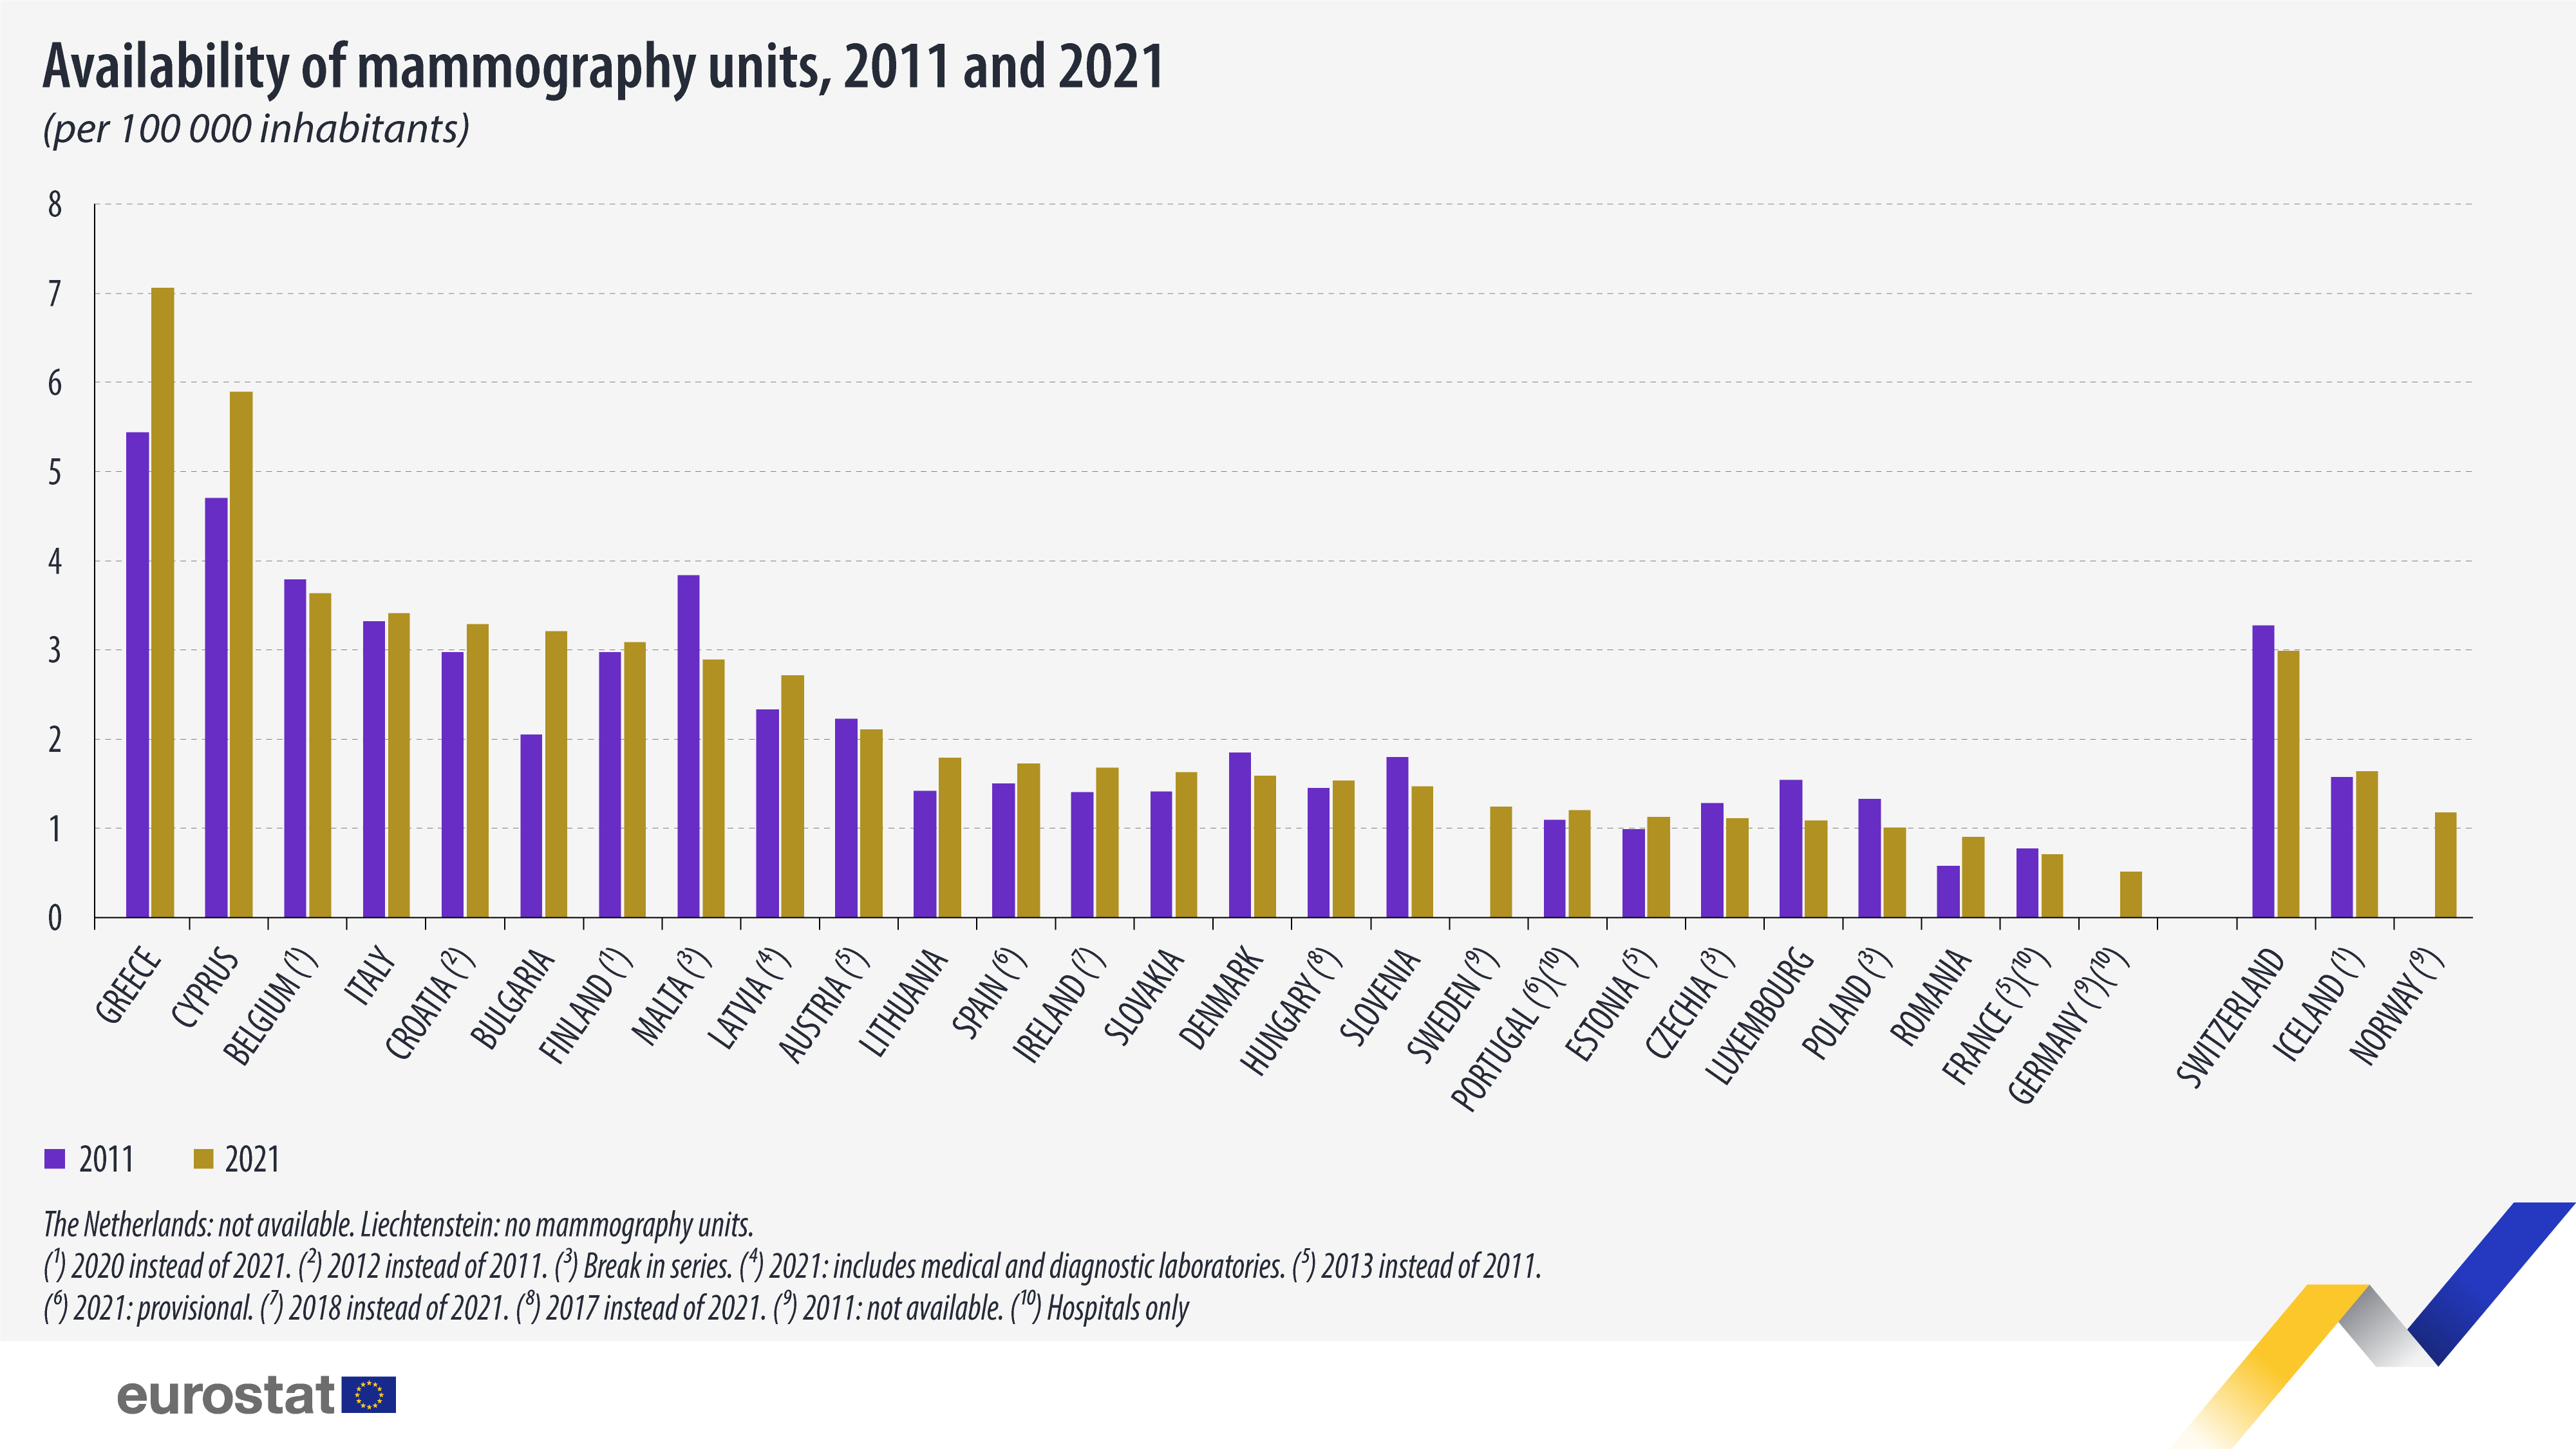 Bar chart: Availability of mammography units, per 100 000 inhabitants, 2011 and 2021